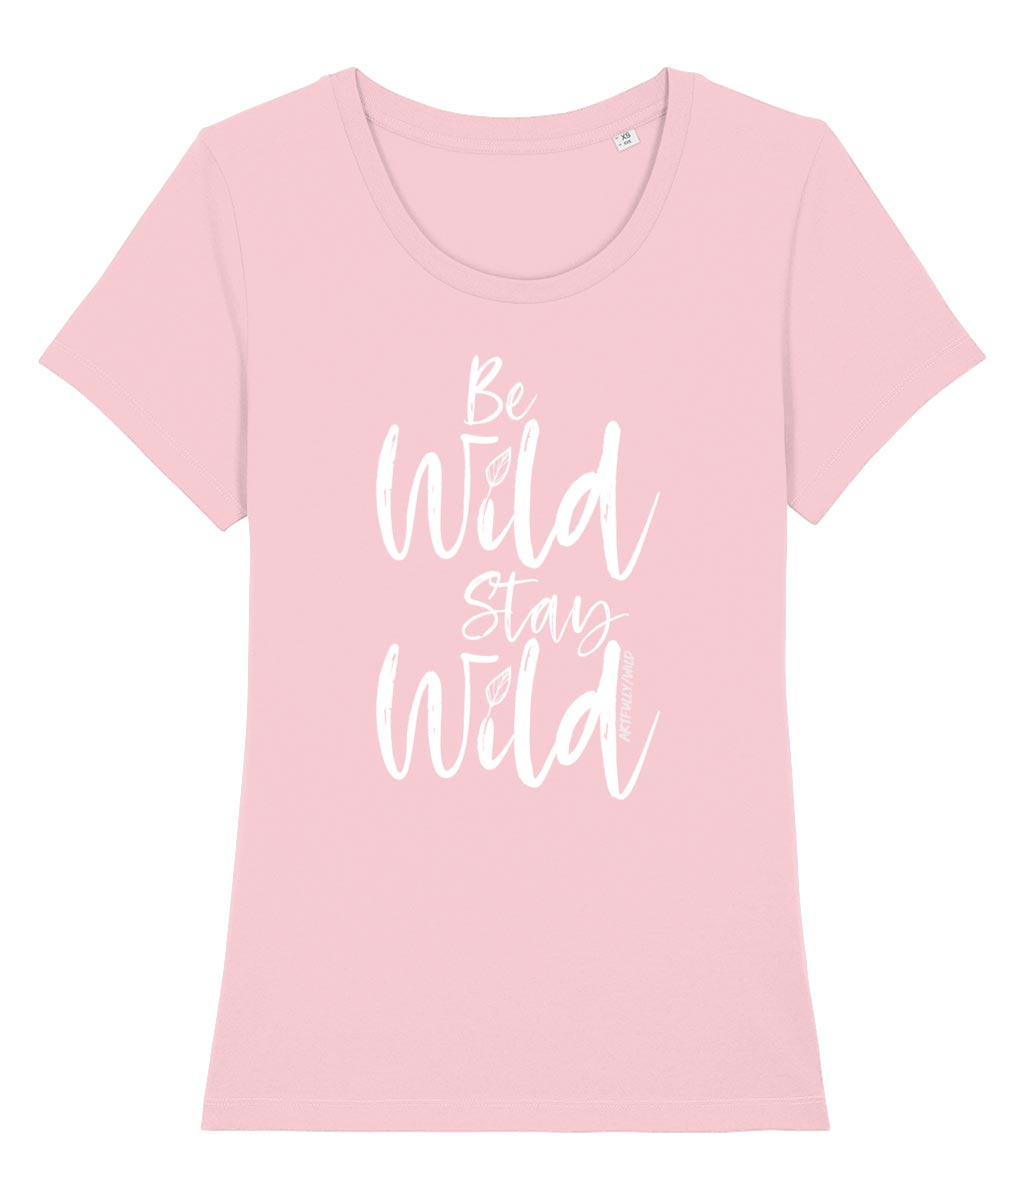 ‘BE WILD STAY WILD’ Women's Cotton Pink Fitted T-Shirt. Eco-friendly organic cotton. White slogan print with water-based inks.